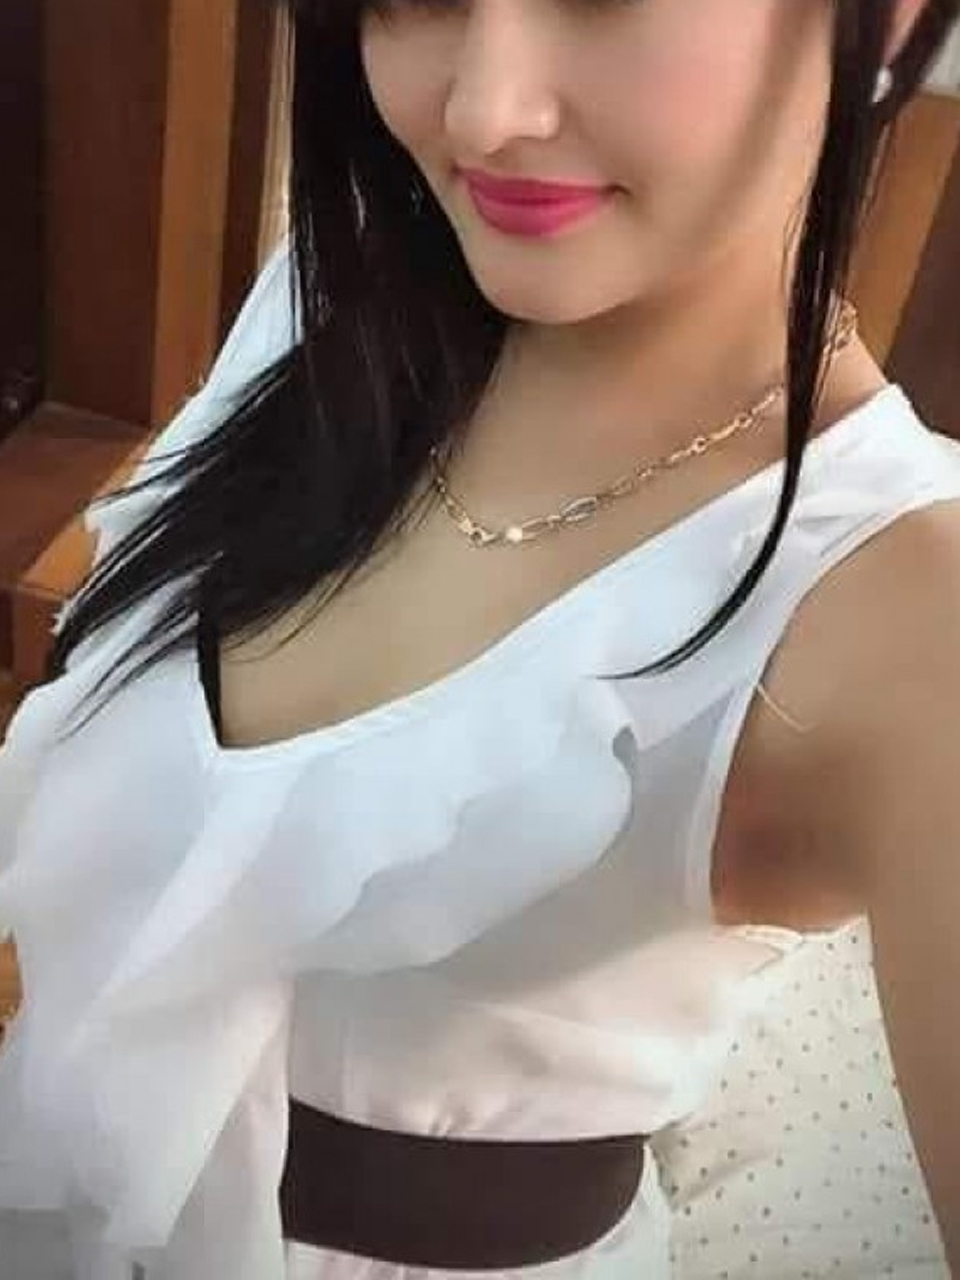 Call Girls Number in Hyderabad